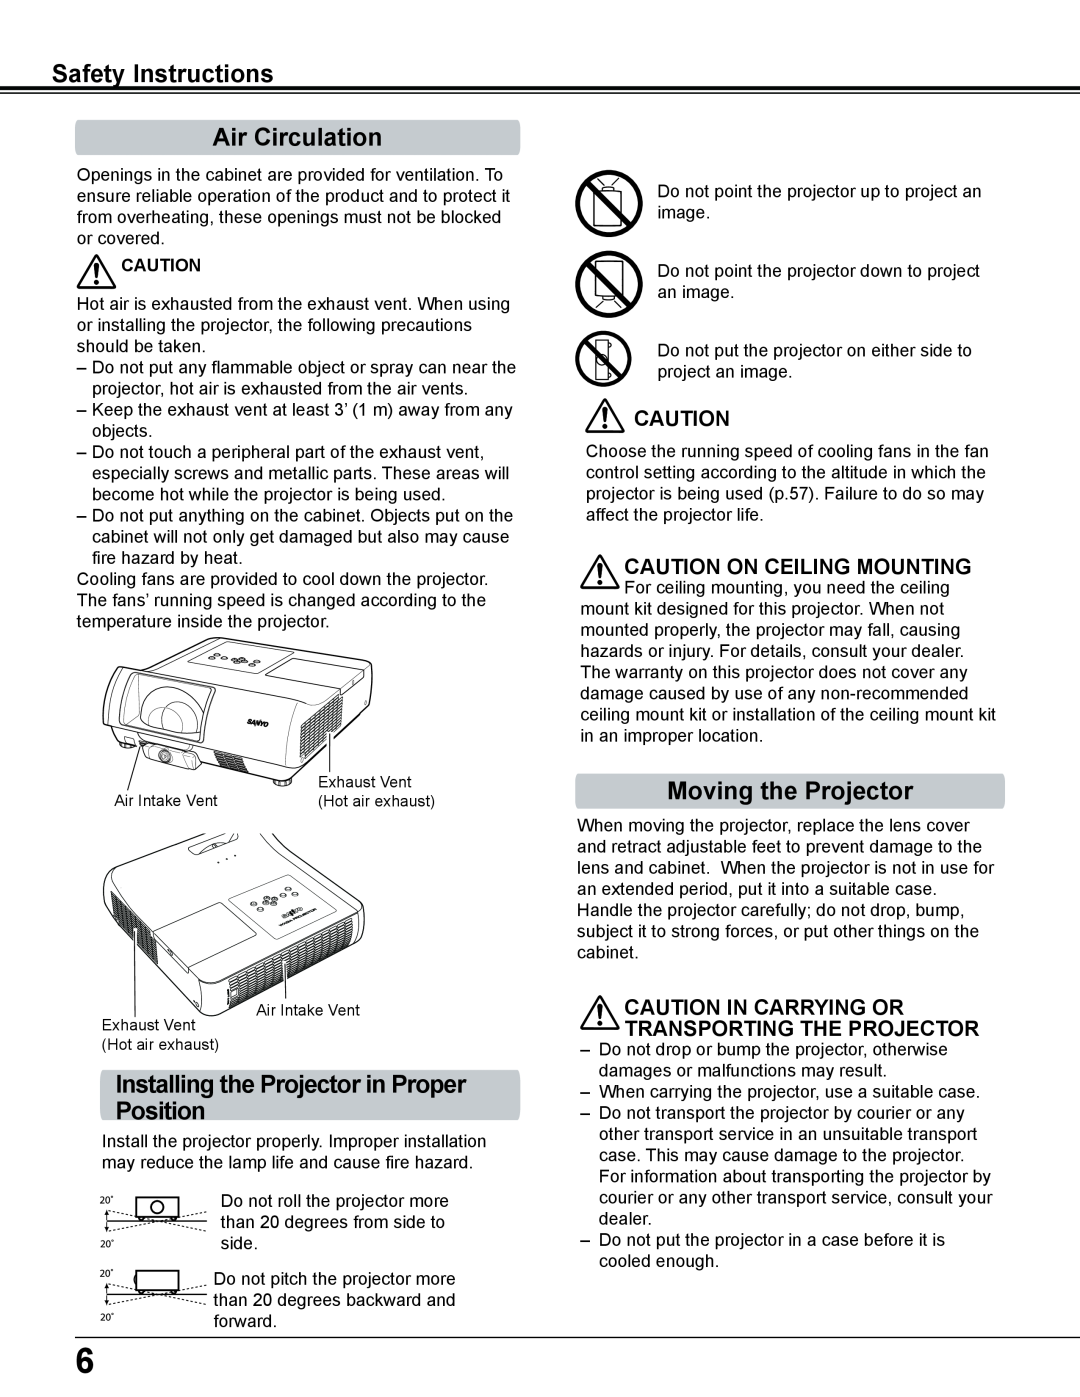 Sanyo PLC-WL2503A Safety Instructions Air Circulation, Moving the Projector, Installing the Projector in Proper Position 